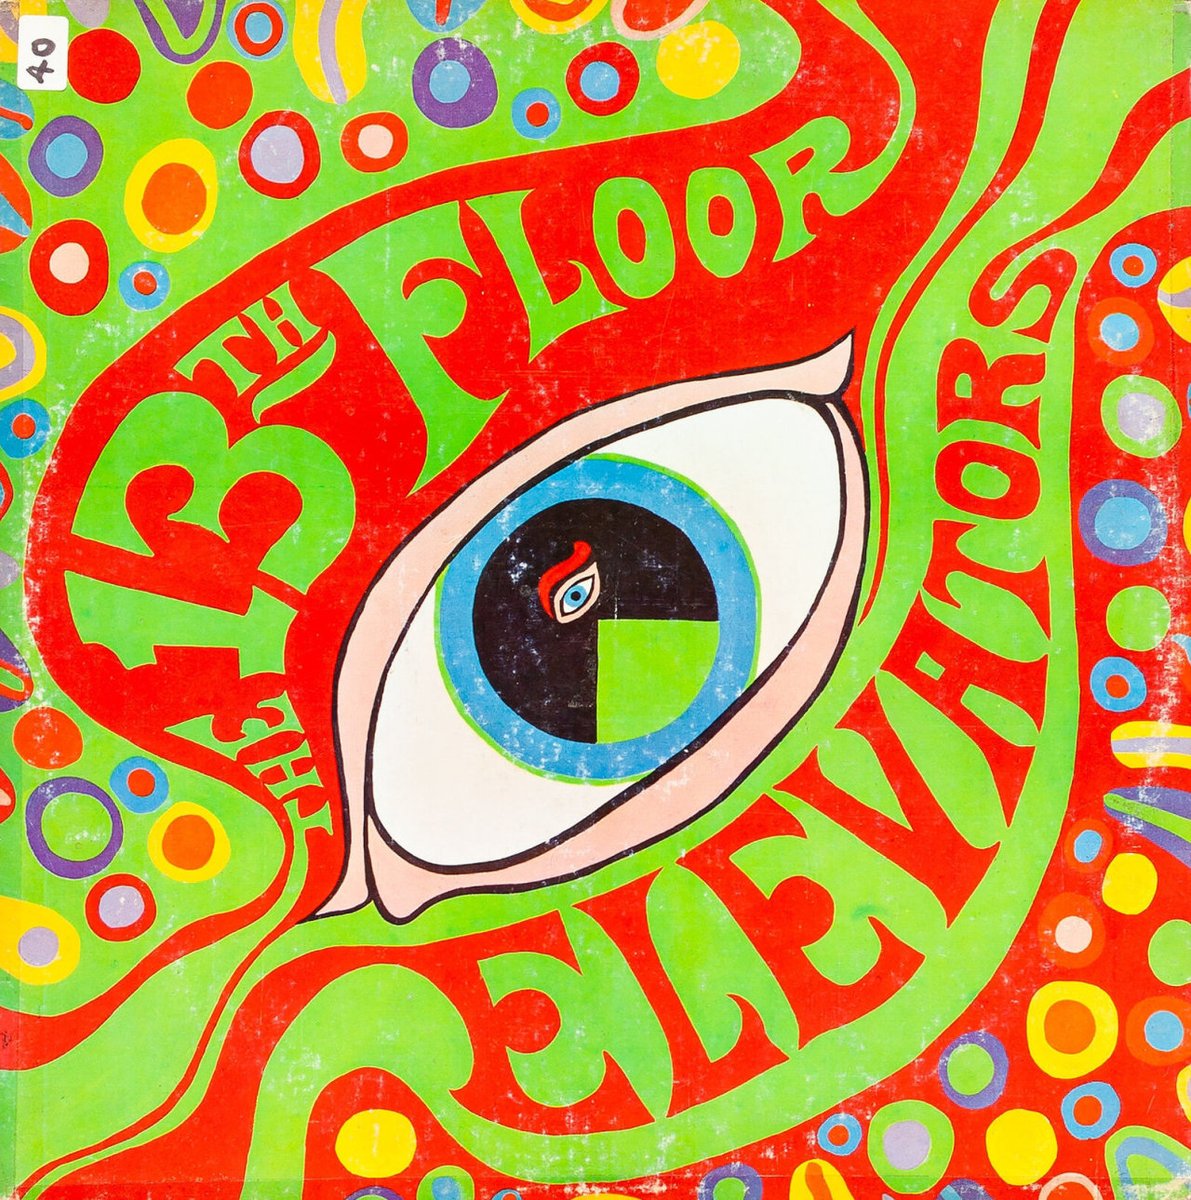 The Psychedelic Sounds of the 13th Floor Elevators (International Artists, 1966). Cover design by John Cleveland.